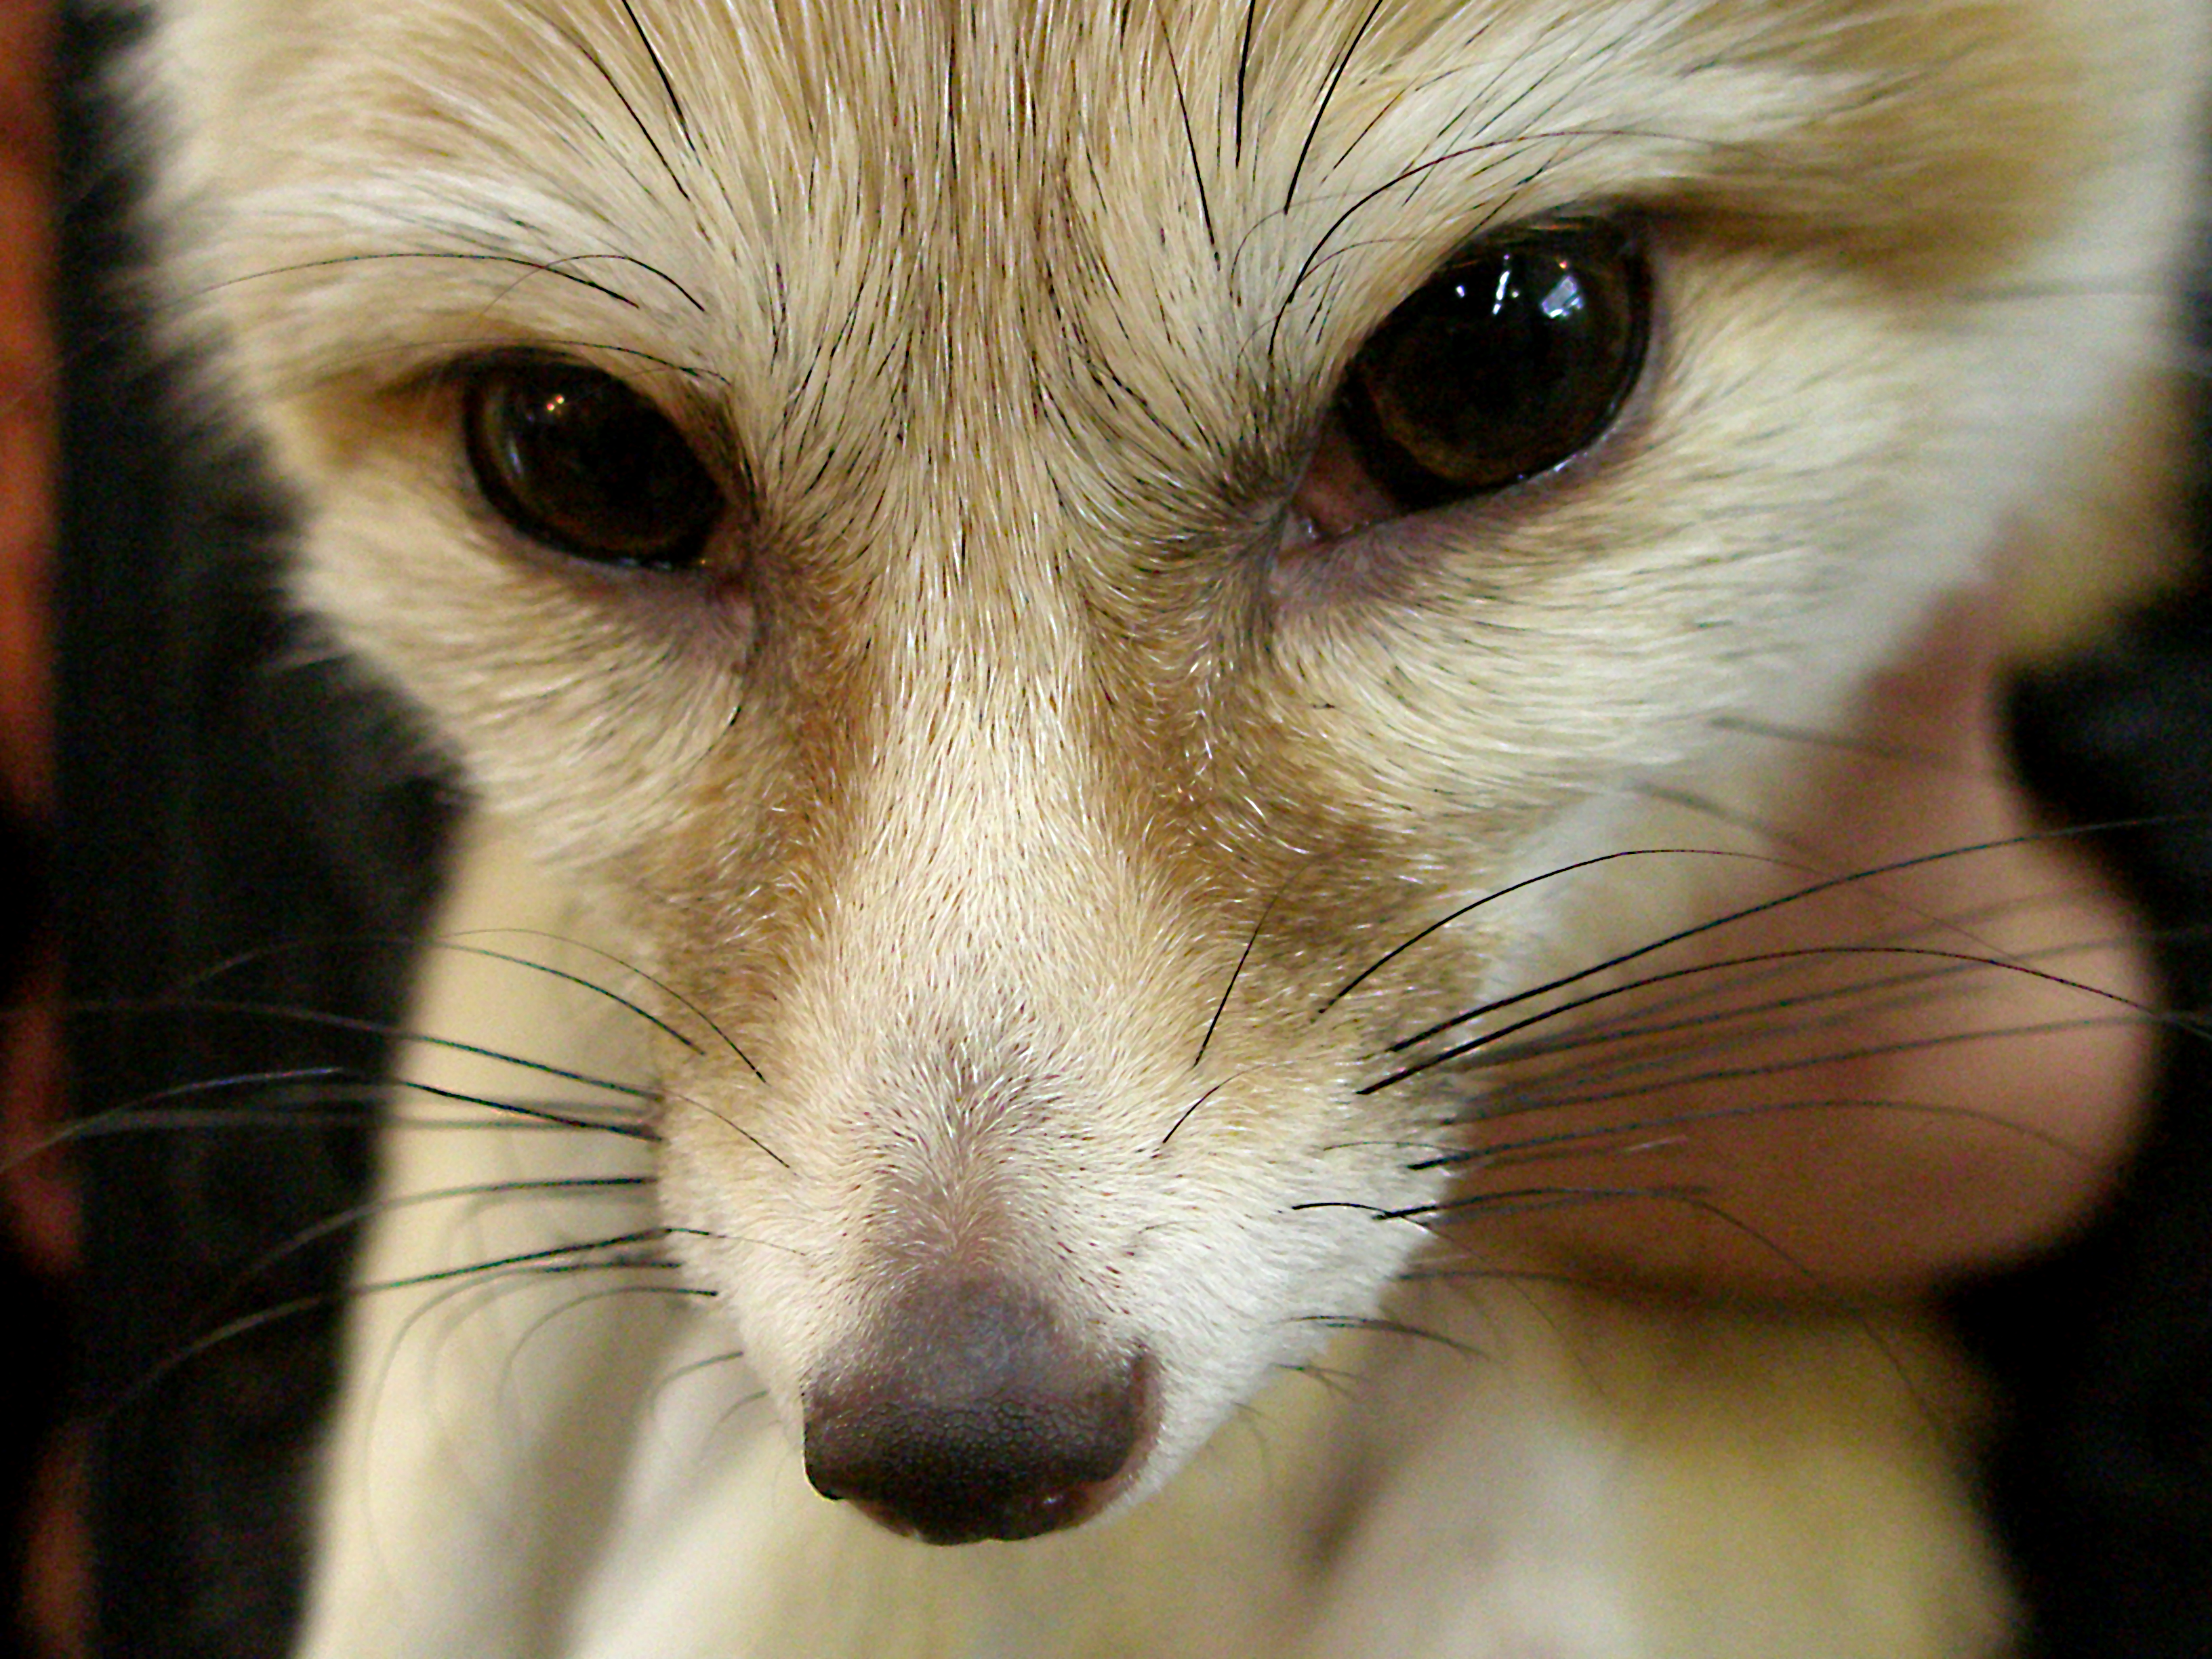 File:Fennec close up.jpg - Wikimedia Commons